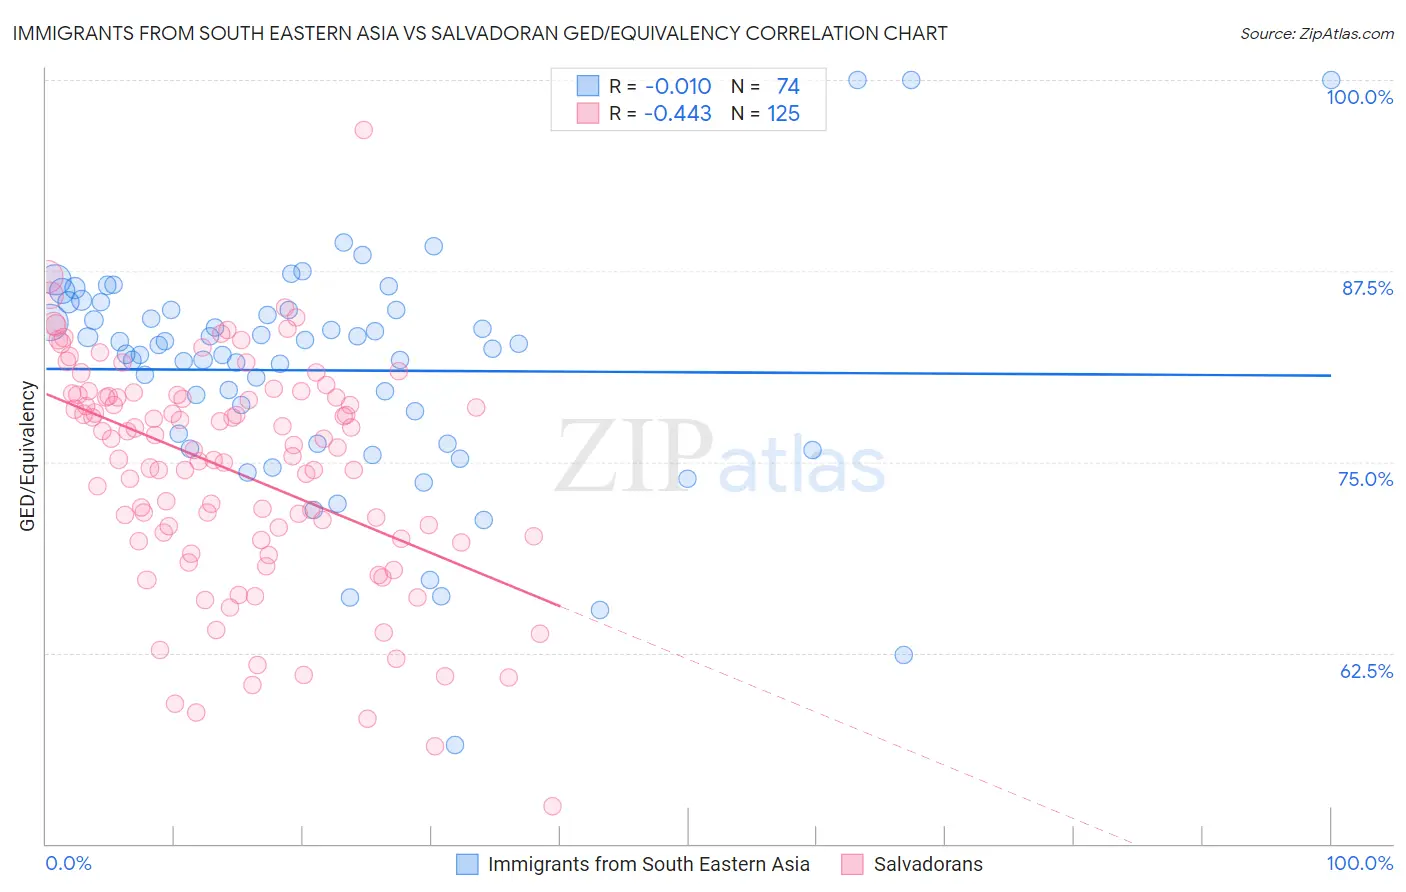 Immigrants from South Eastern Asia vs Salvadoran GED/Equivalency